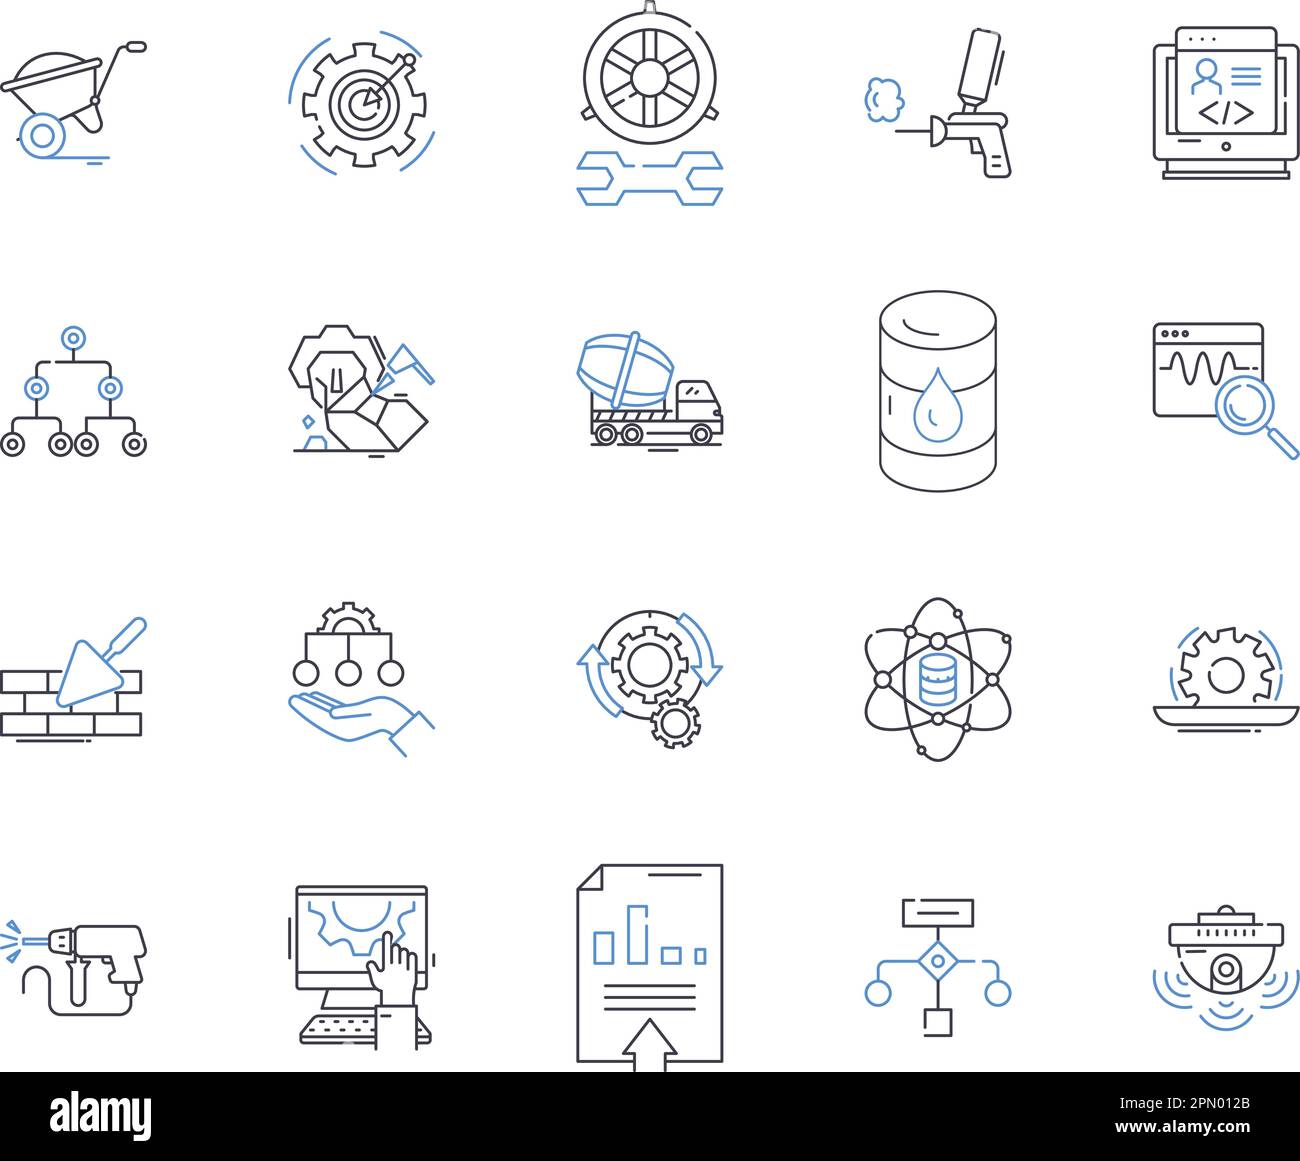 Builder and industry outline icons collection. Builder, Industry, Construction, Development, Foreman, Architect, Contractor vector and illustration Stock Vector